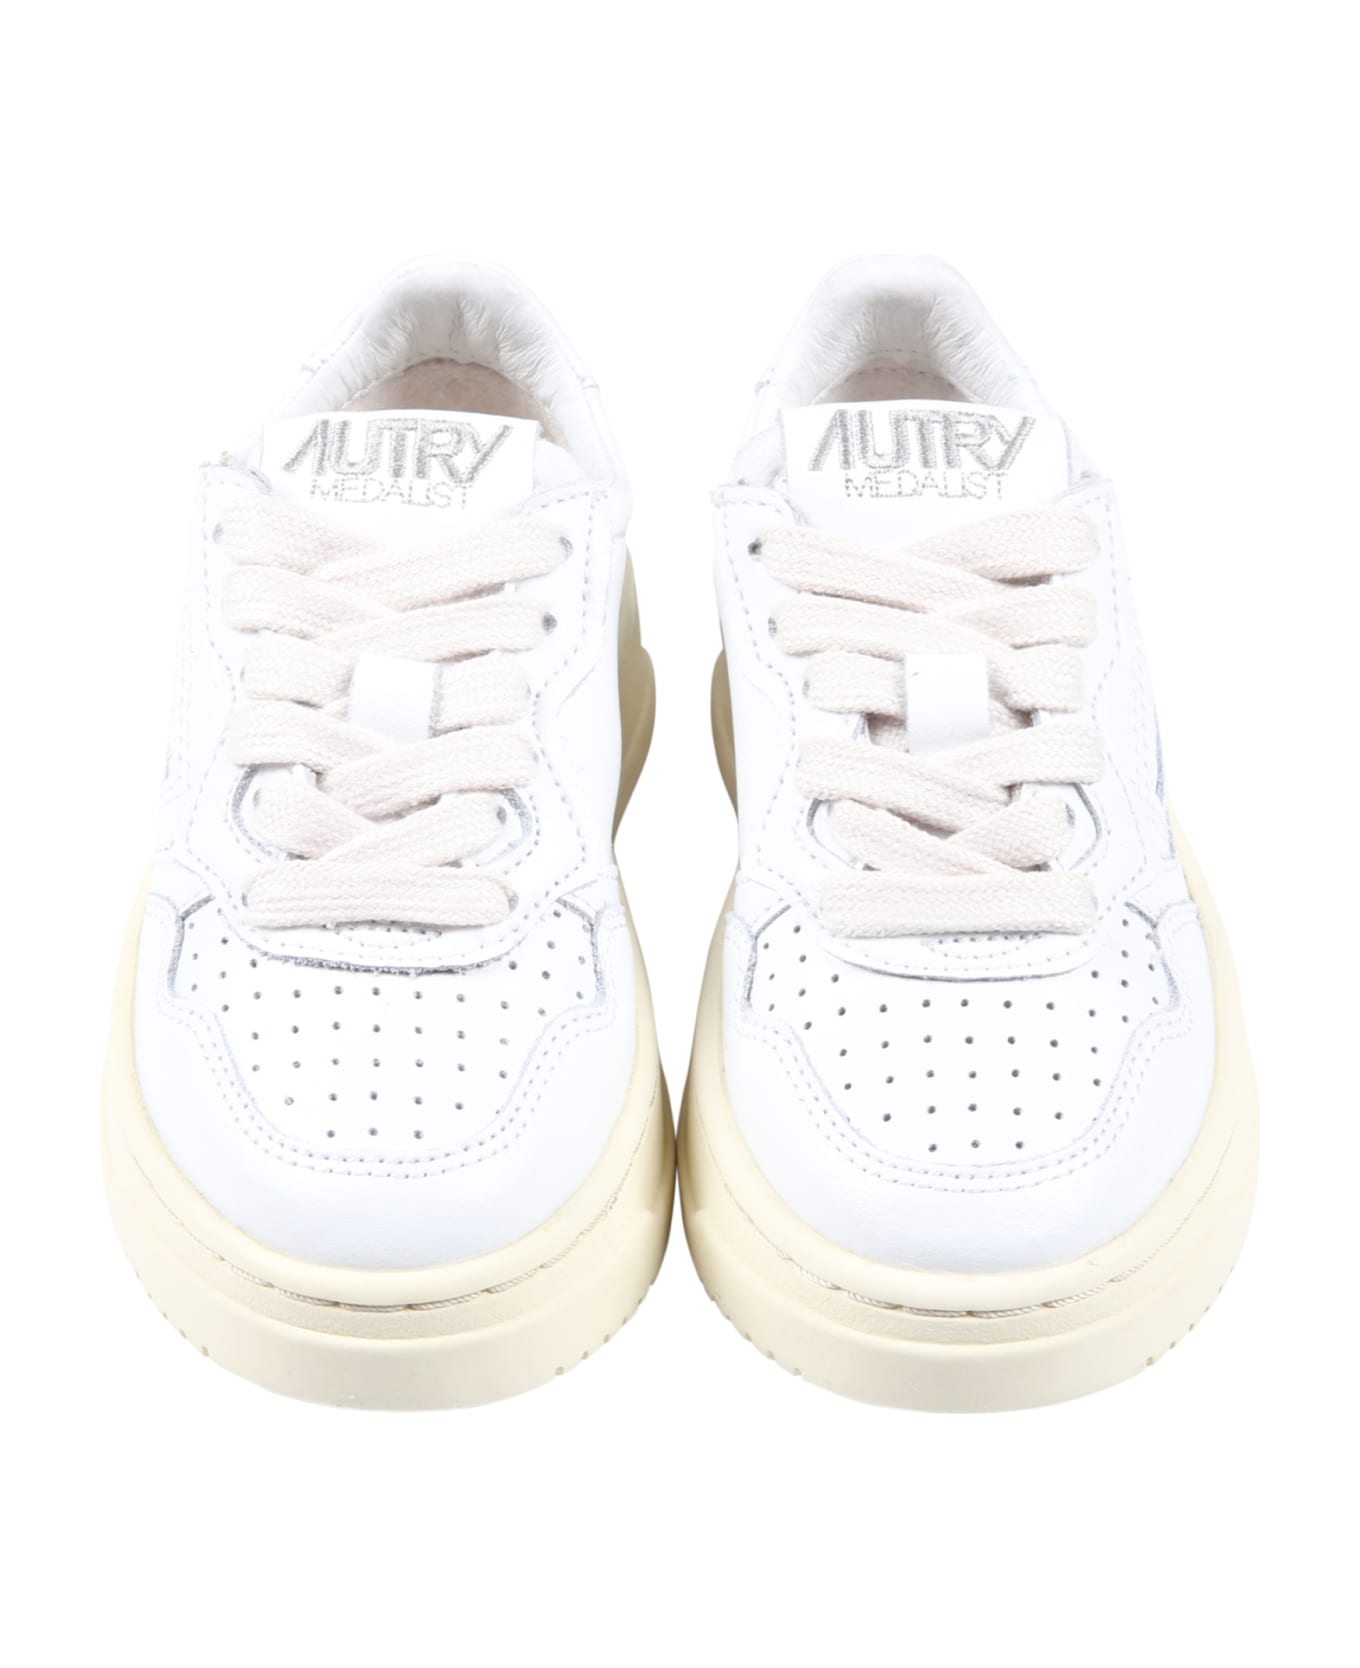 Autry White Sneakers For Kids With Ivory Deatils - White